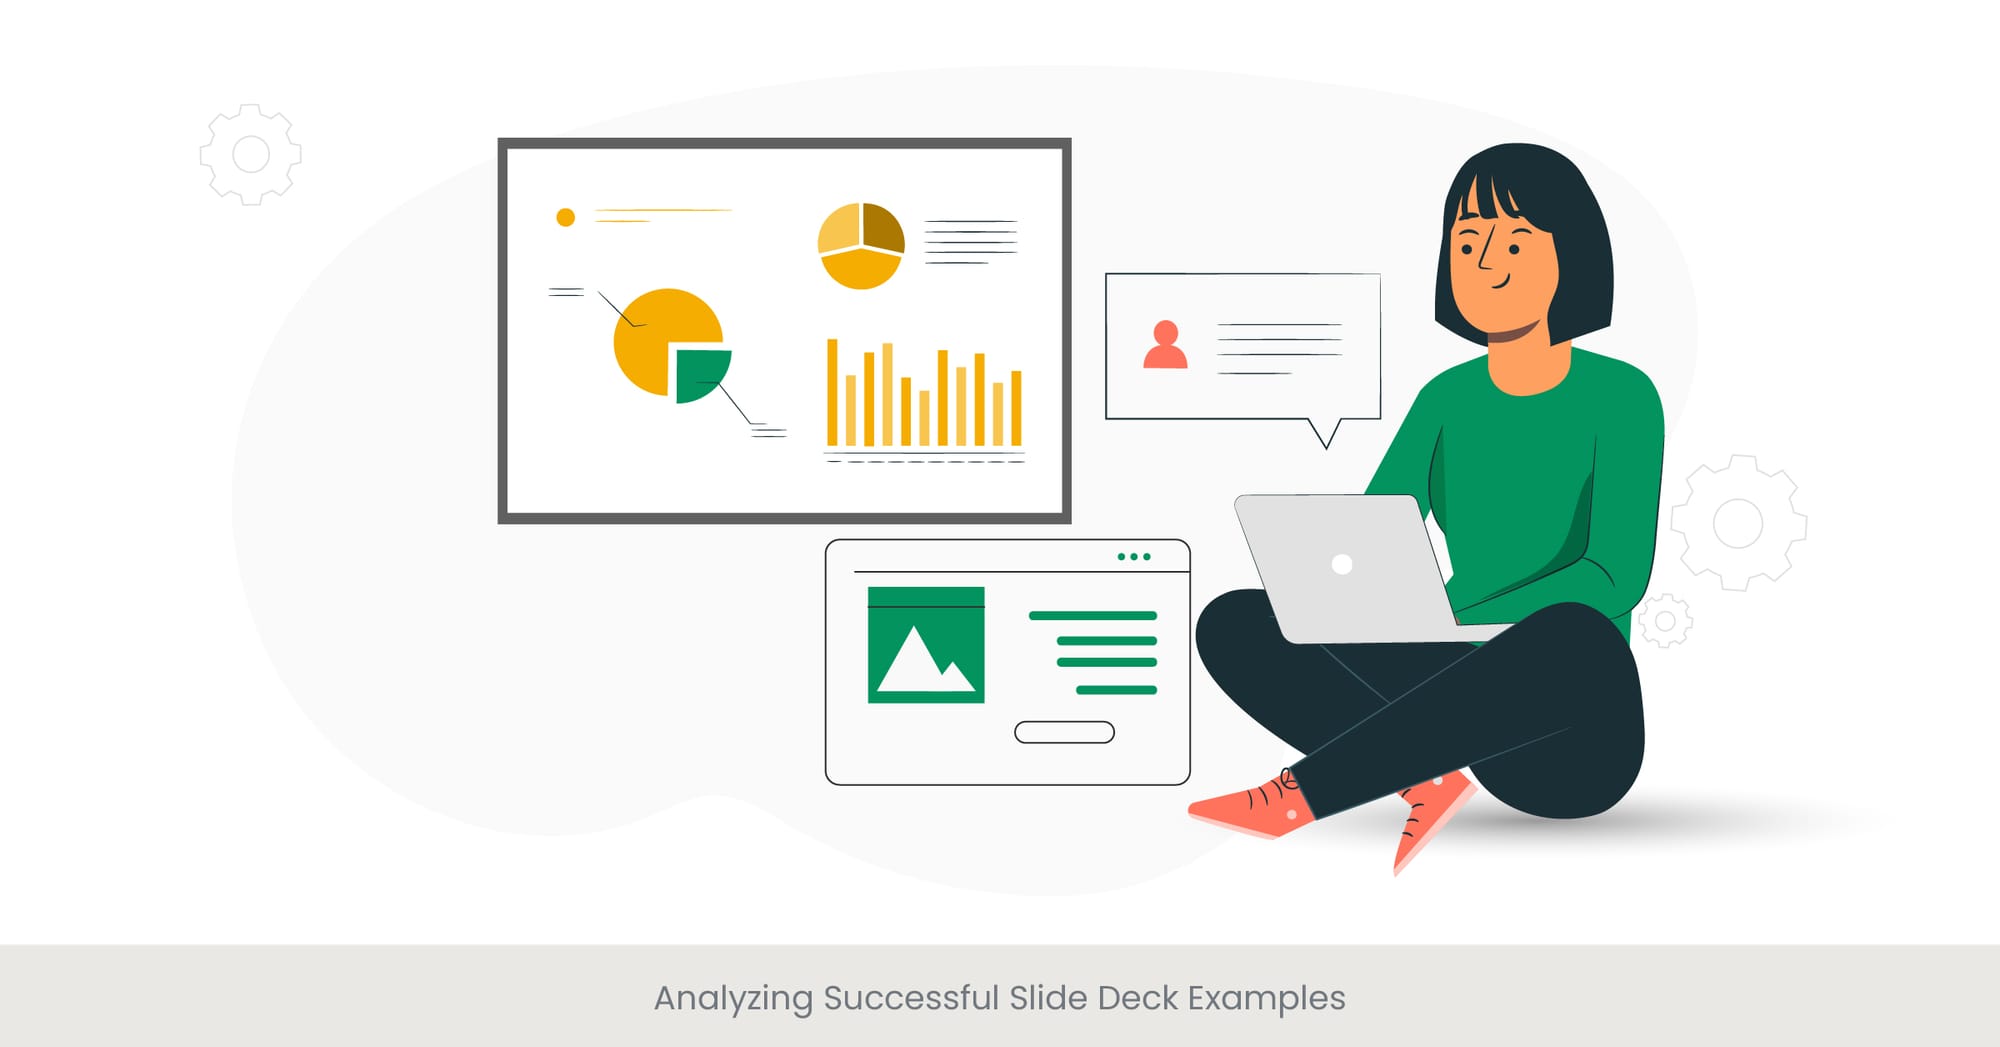 Analyzing Successful Slide Deck Examples